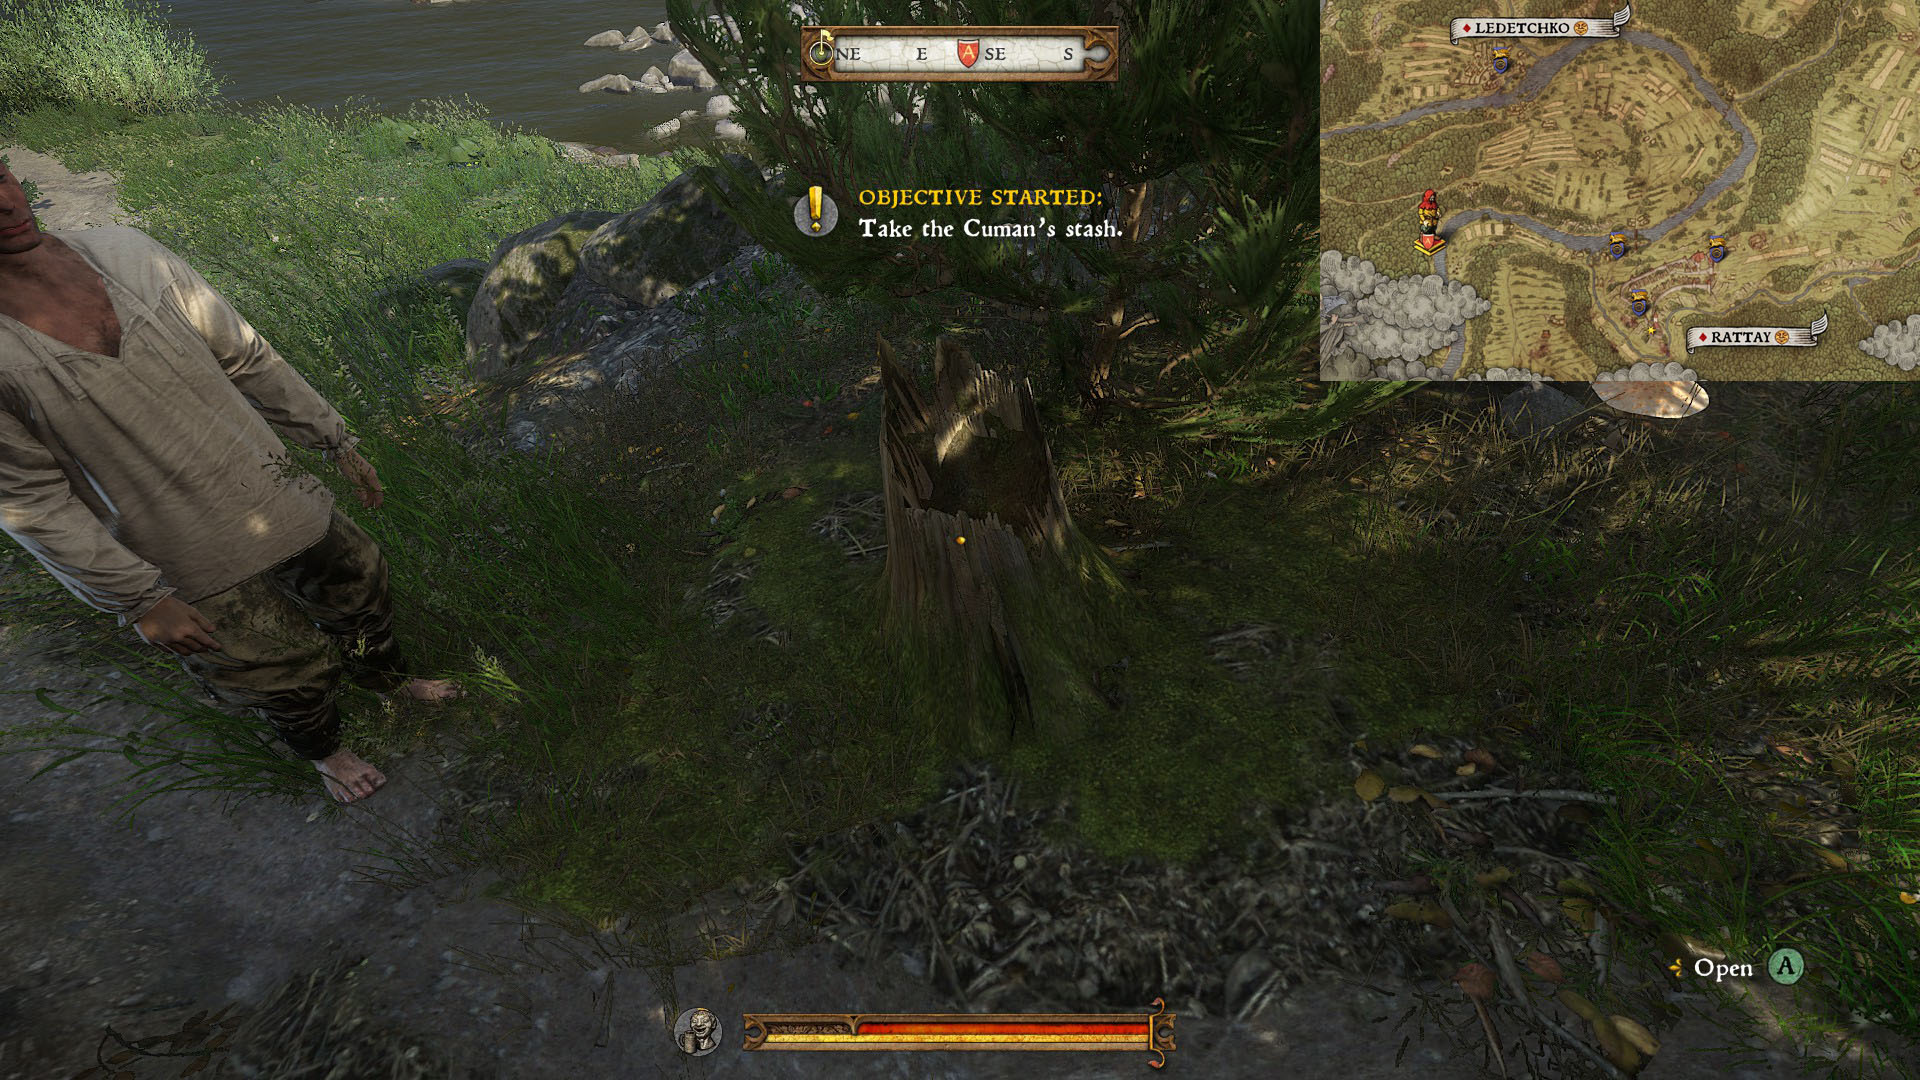 Kingdom Come Deliverance Lost in Translation's quest asks you to find this stash inside a tree stump